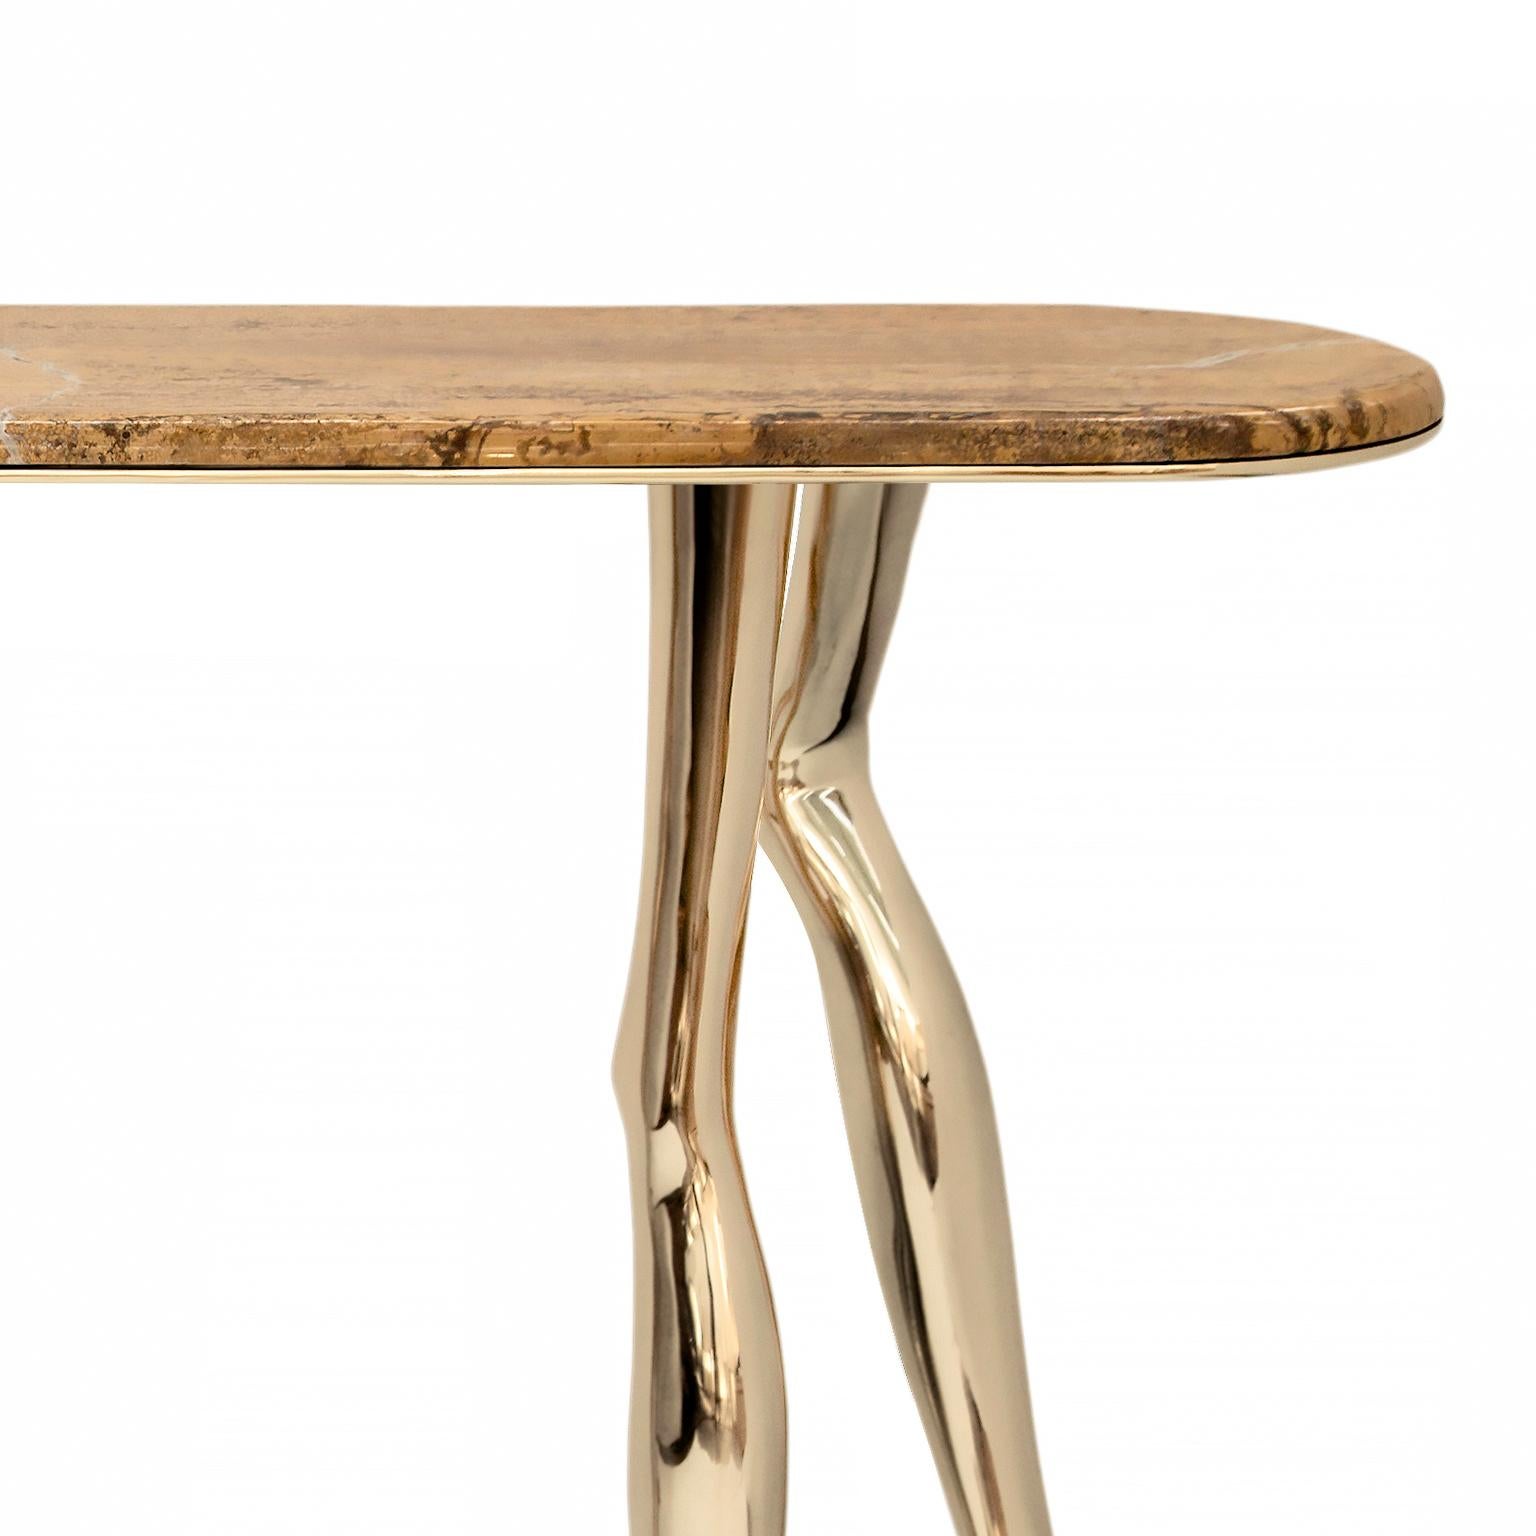 Modern Monroe Console Table in Polished Brass and Yellow Travertine Marble In New Condition For Sale In Oporto, PT